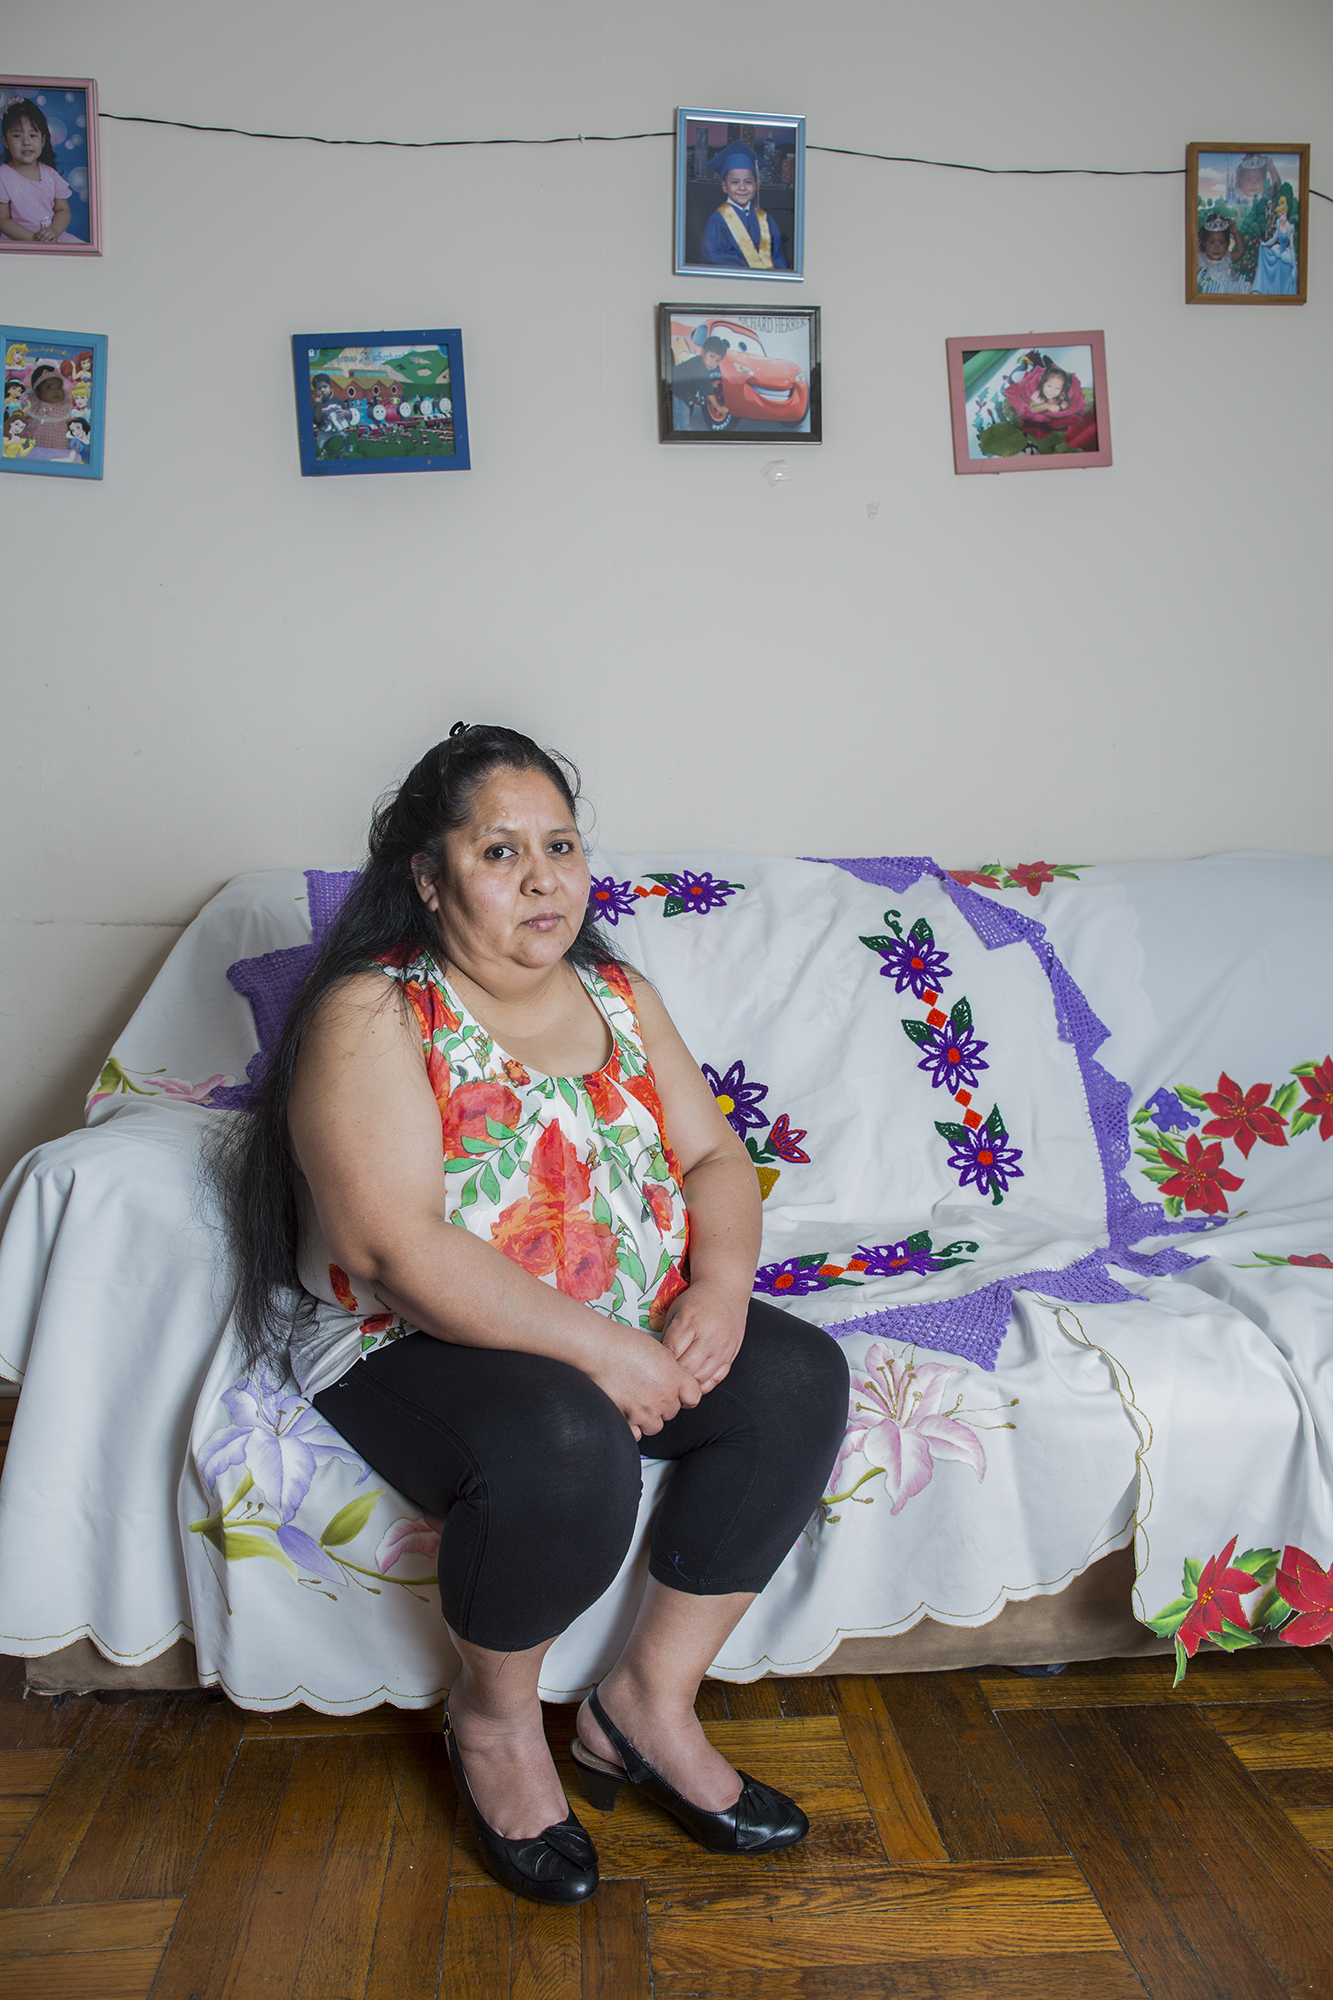  Elizabeth Herrera in her house in Bay Ridge, Brooklyn. She is from Temascalapa Puebla - living in New York for the last 16 years. She has two children born in the United States. For now she is working in a bakery and is part of the Adventist Church.